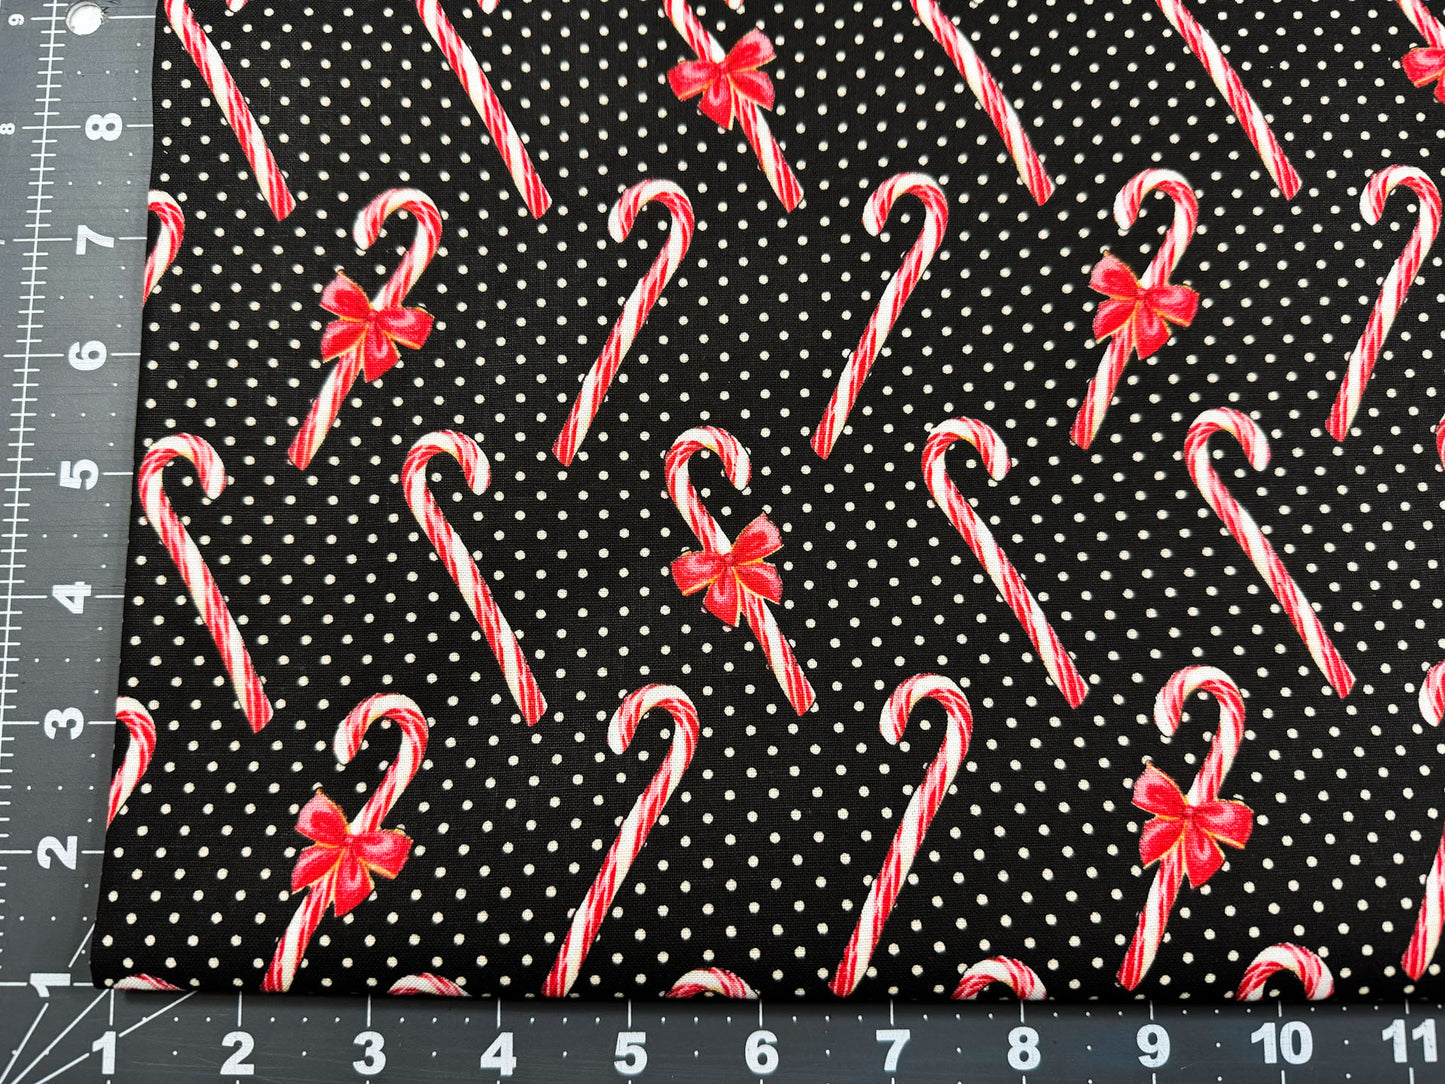 Christmas candy canes fabric 17919 candy cane cotton fabric